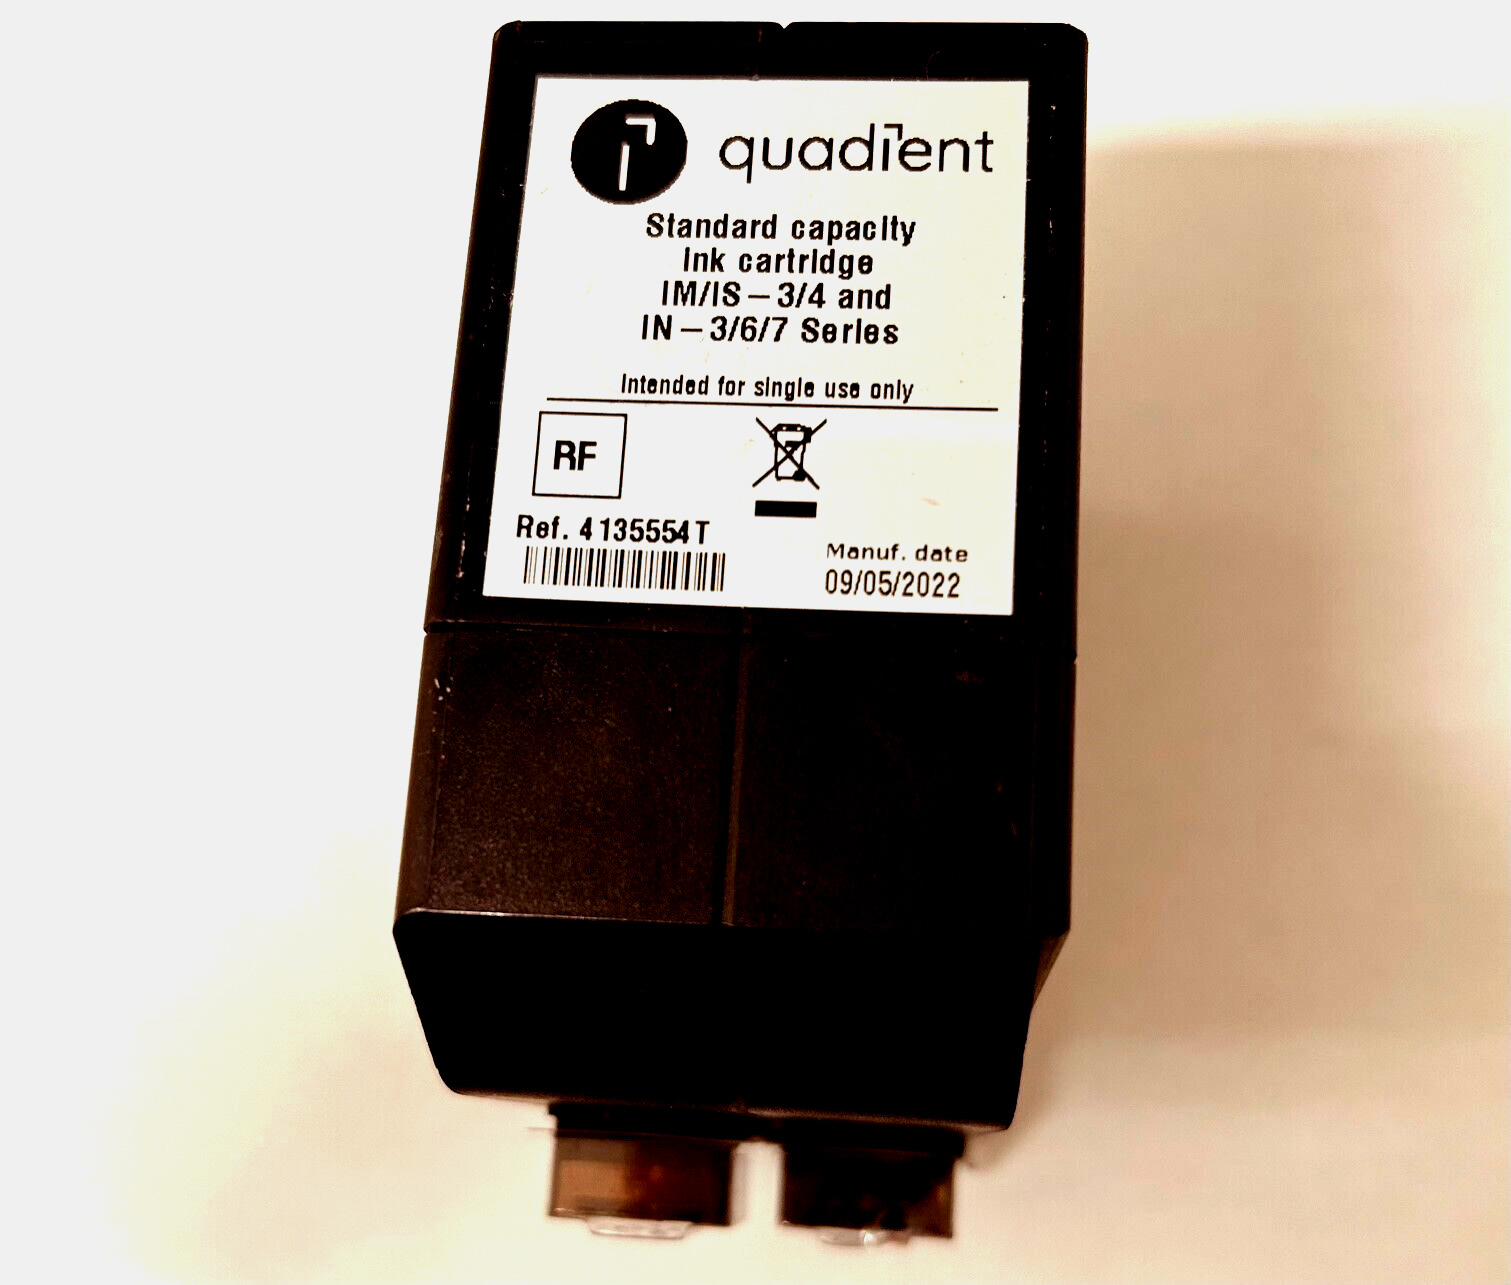 Quadient Ink Cartridge for IM/IS-3/4 and IN-3/6/7 Series NeoPost Postage Machine